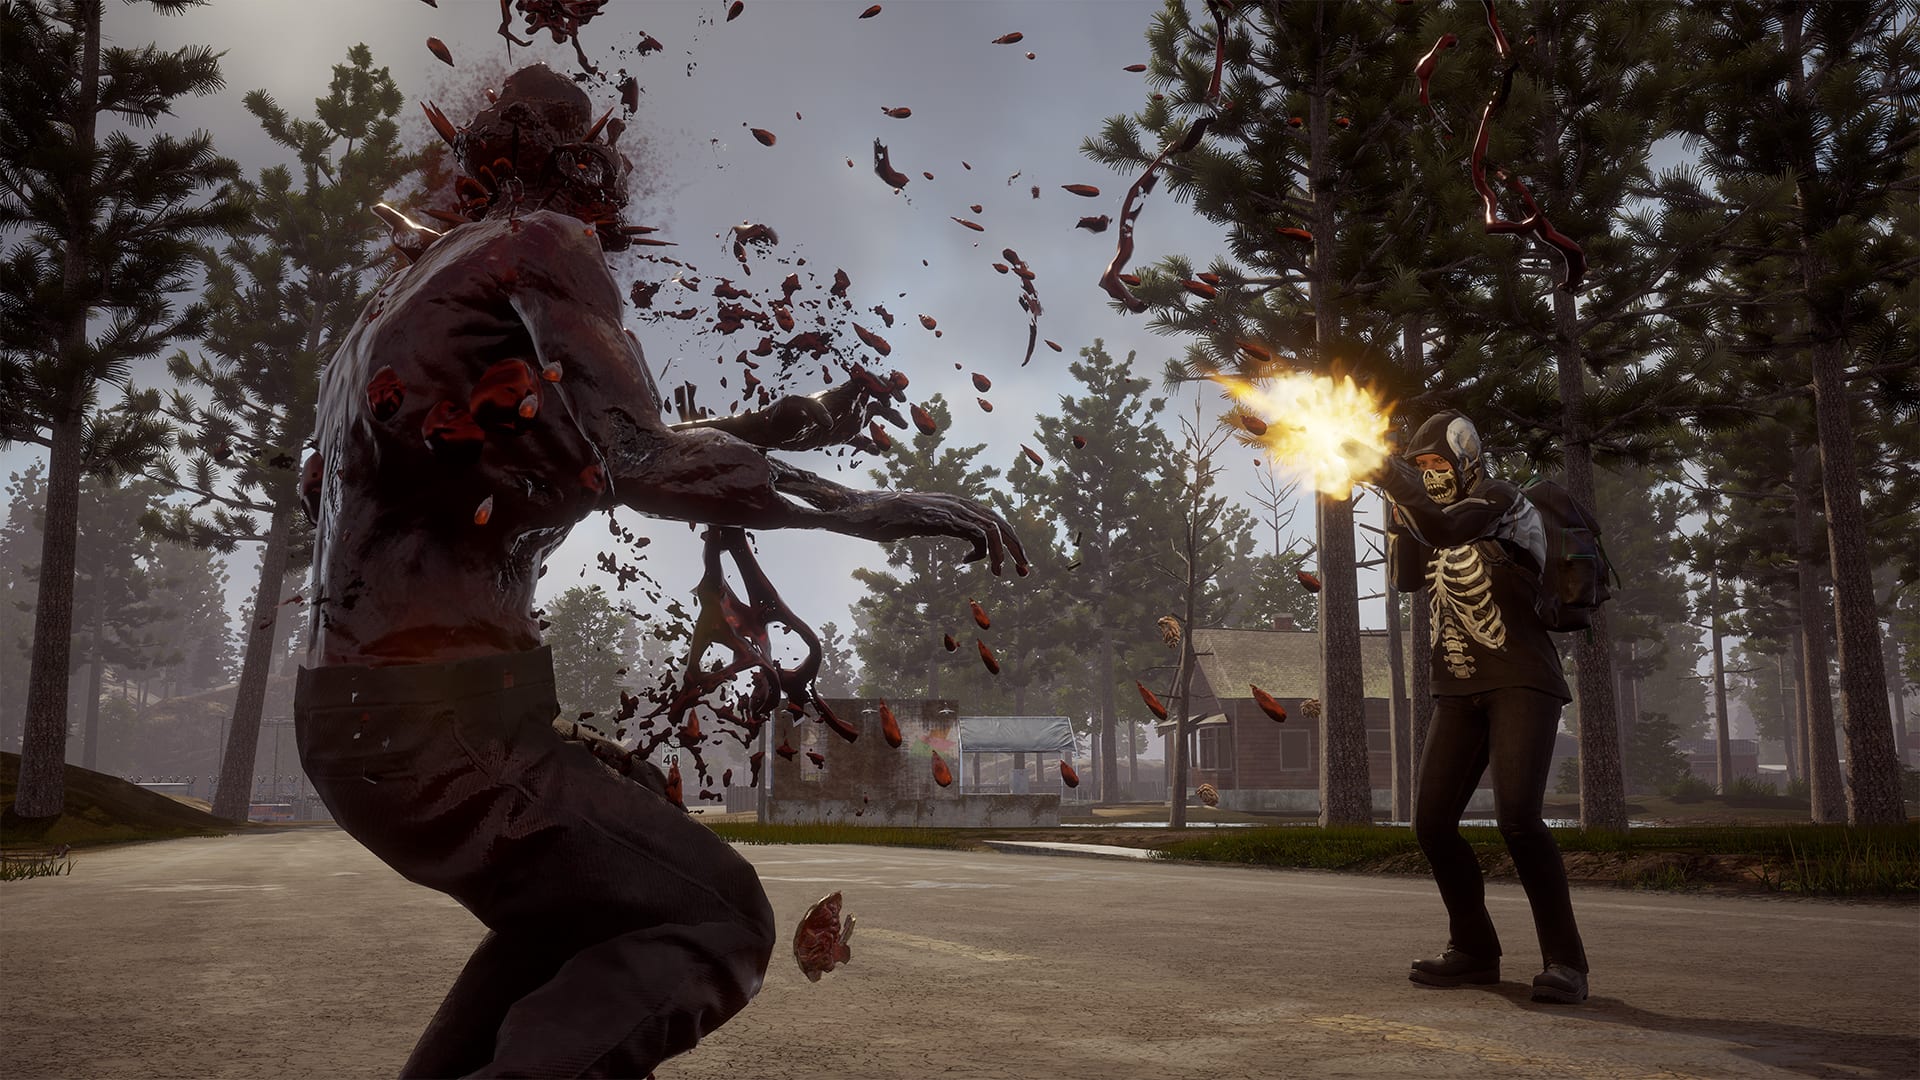 Is State of Decay Crossplay or Cross Platform? [2023 Guide